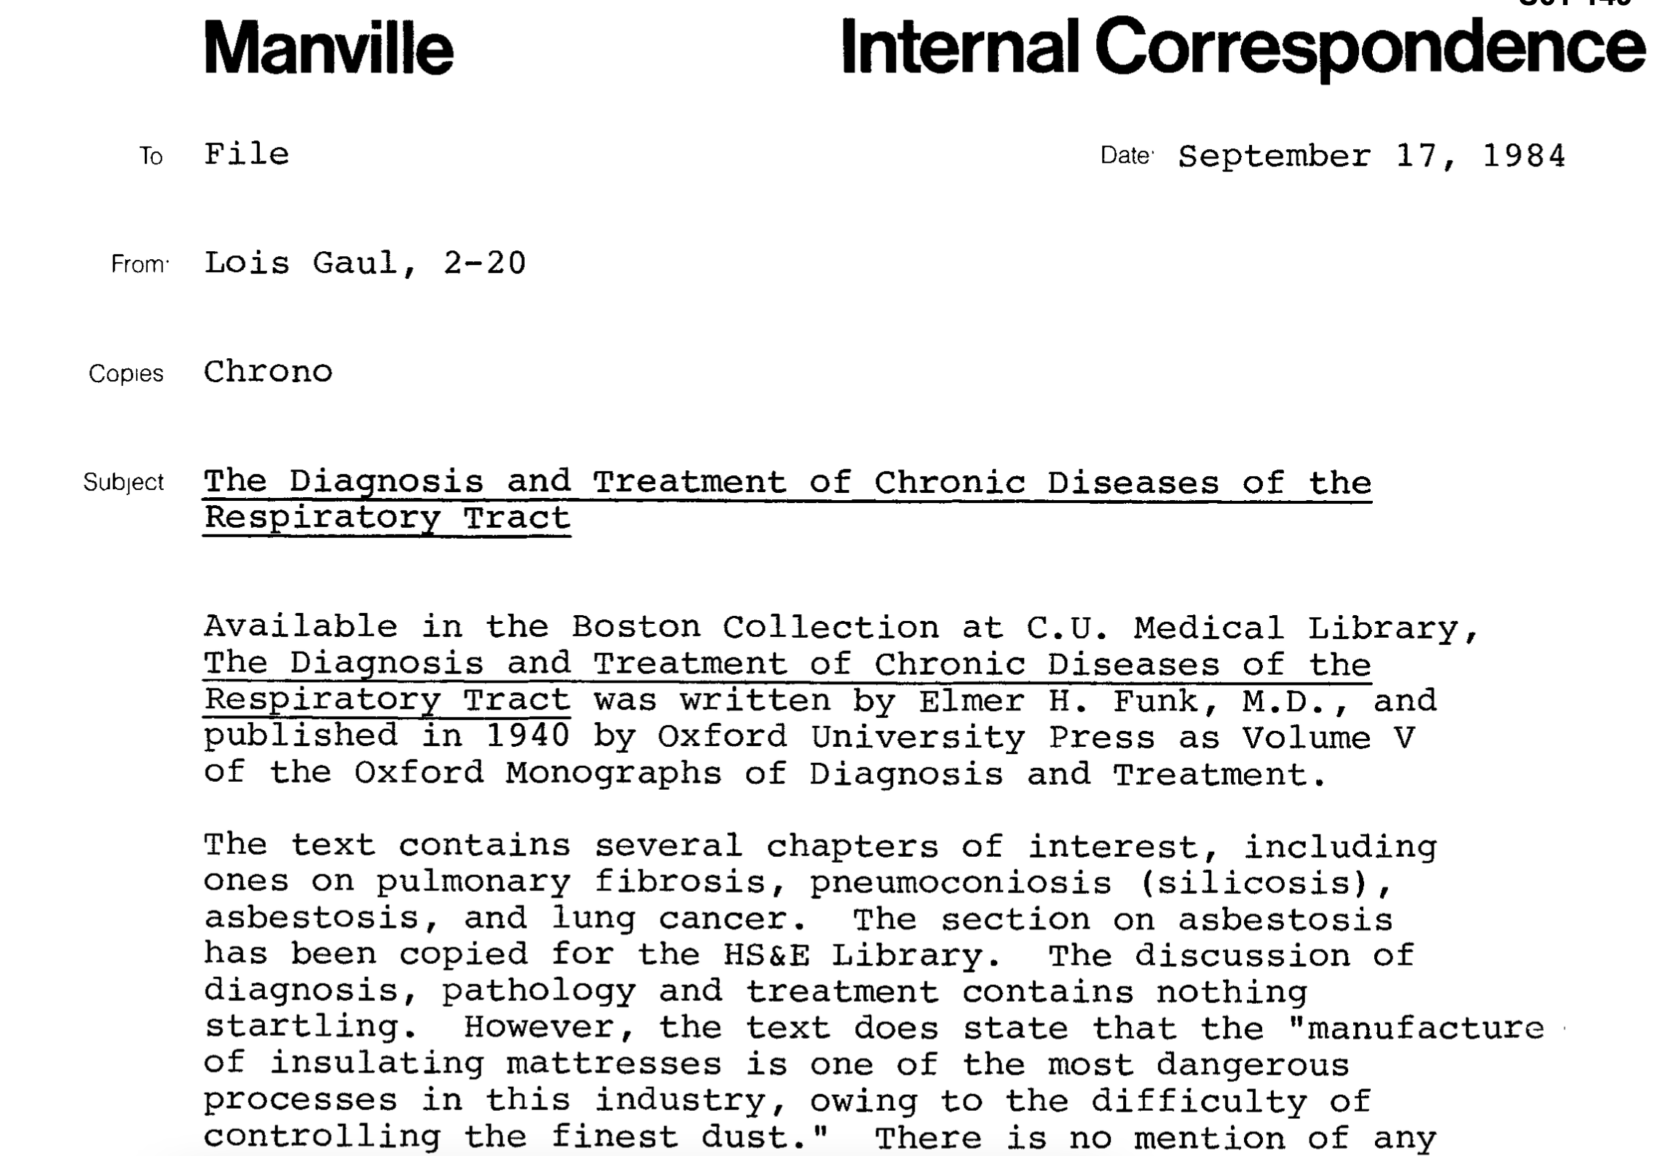 JM Letter Treatment of Cancer Book TheDiagnosisandTreatmentofChronicDiseasesoftheRespiratoryTract